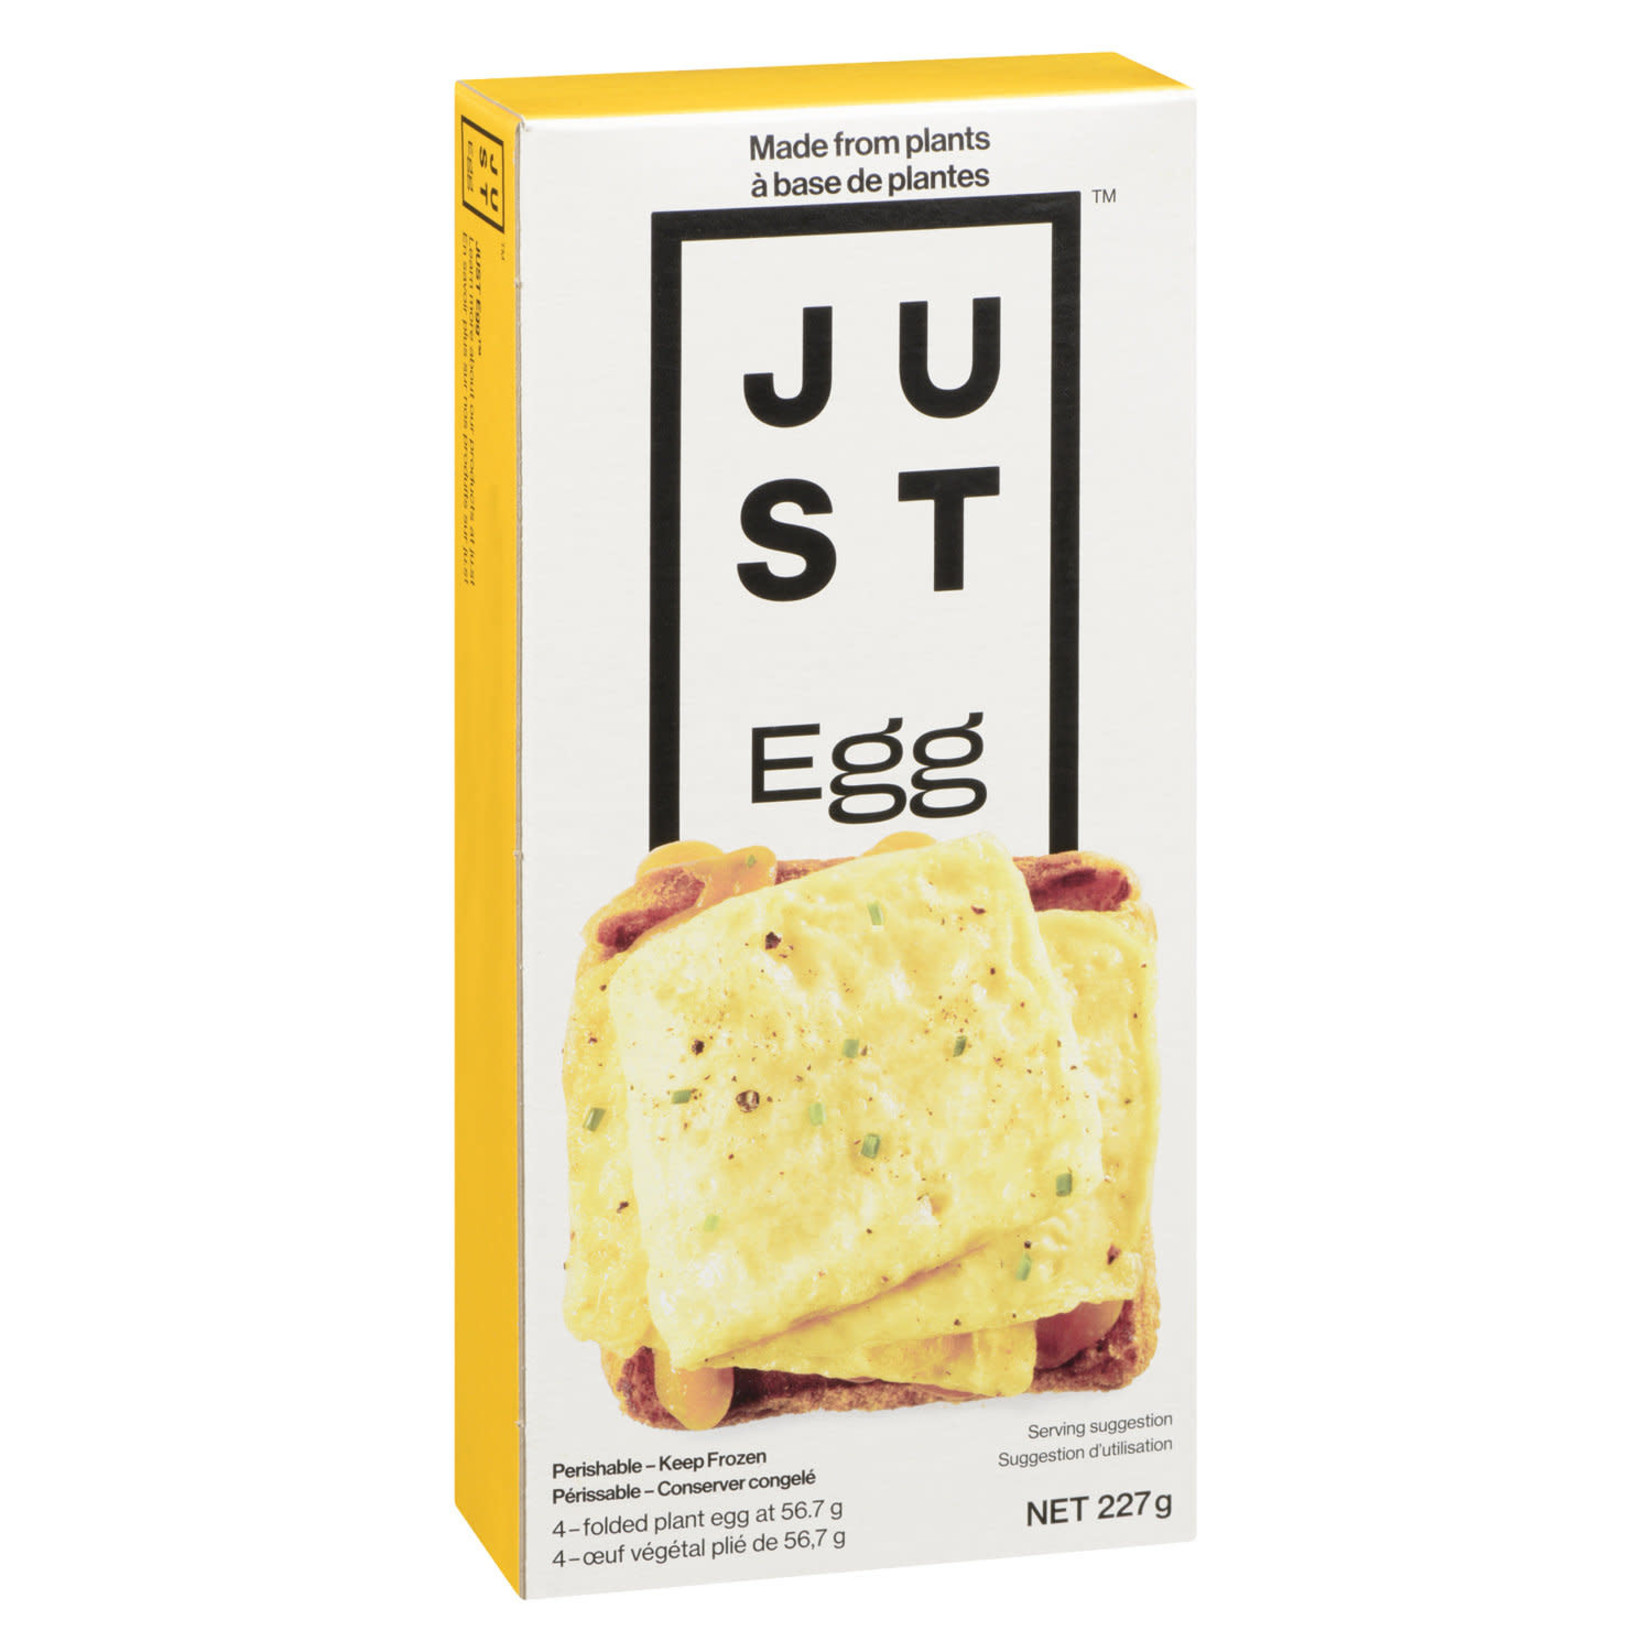 JUST JUST EGG FROZEN FOLDED PATTY 4-PACK